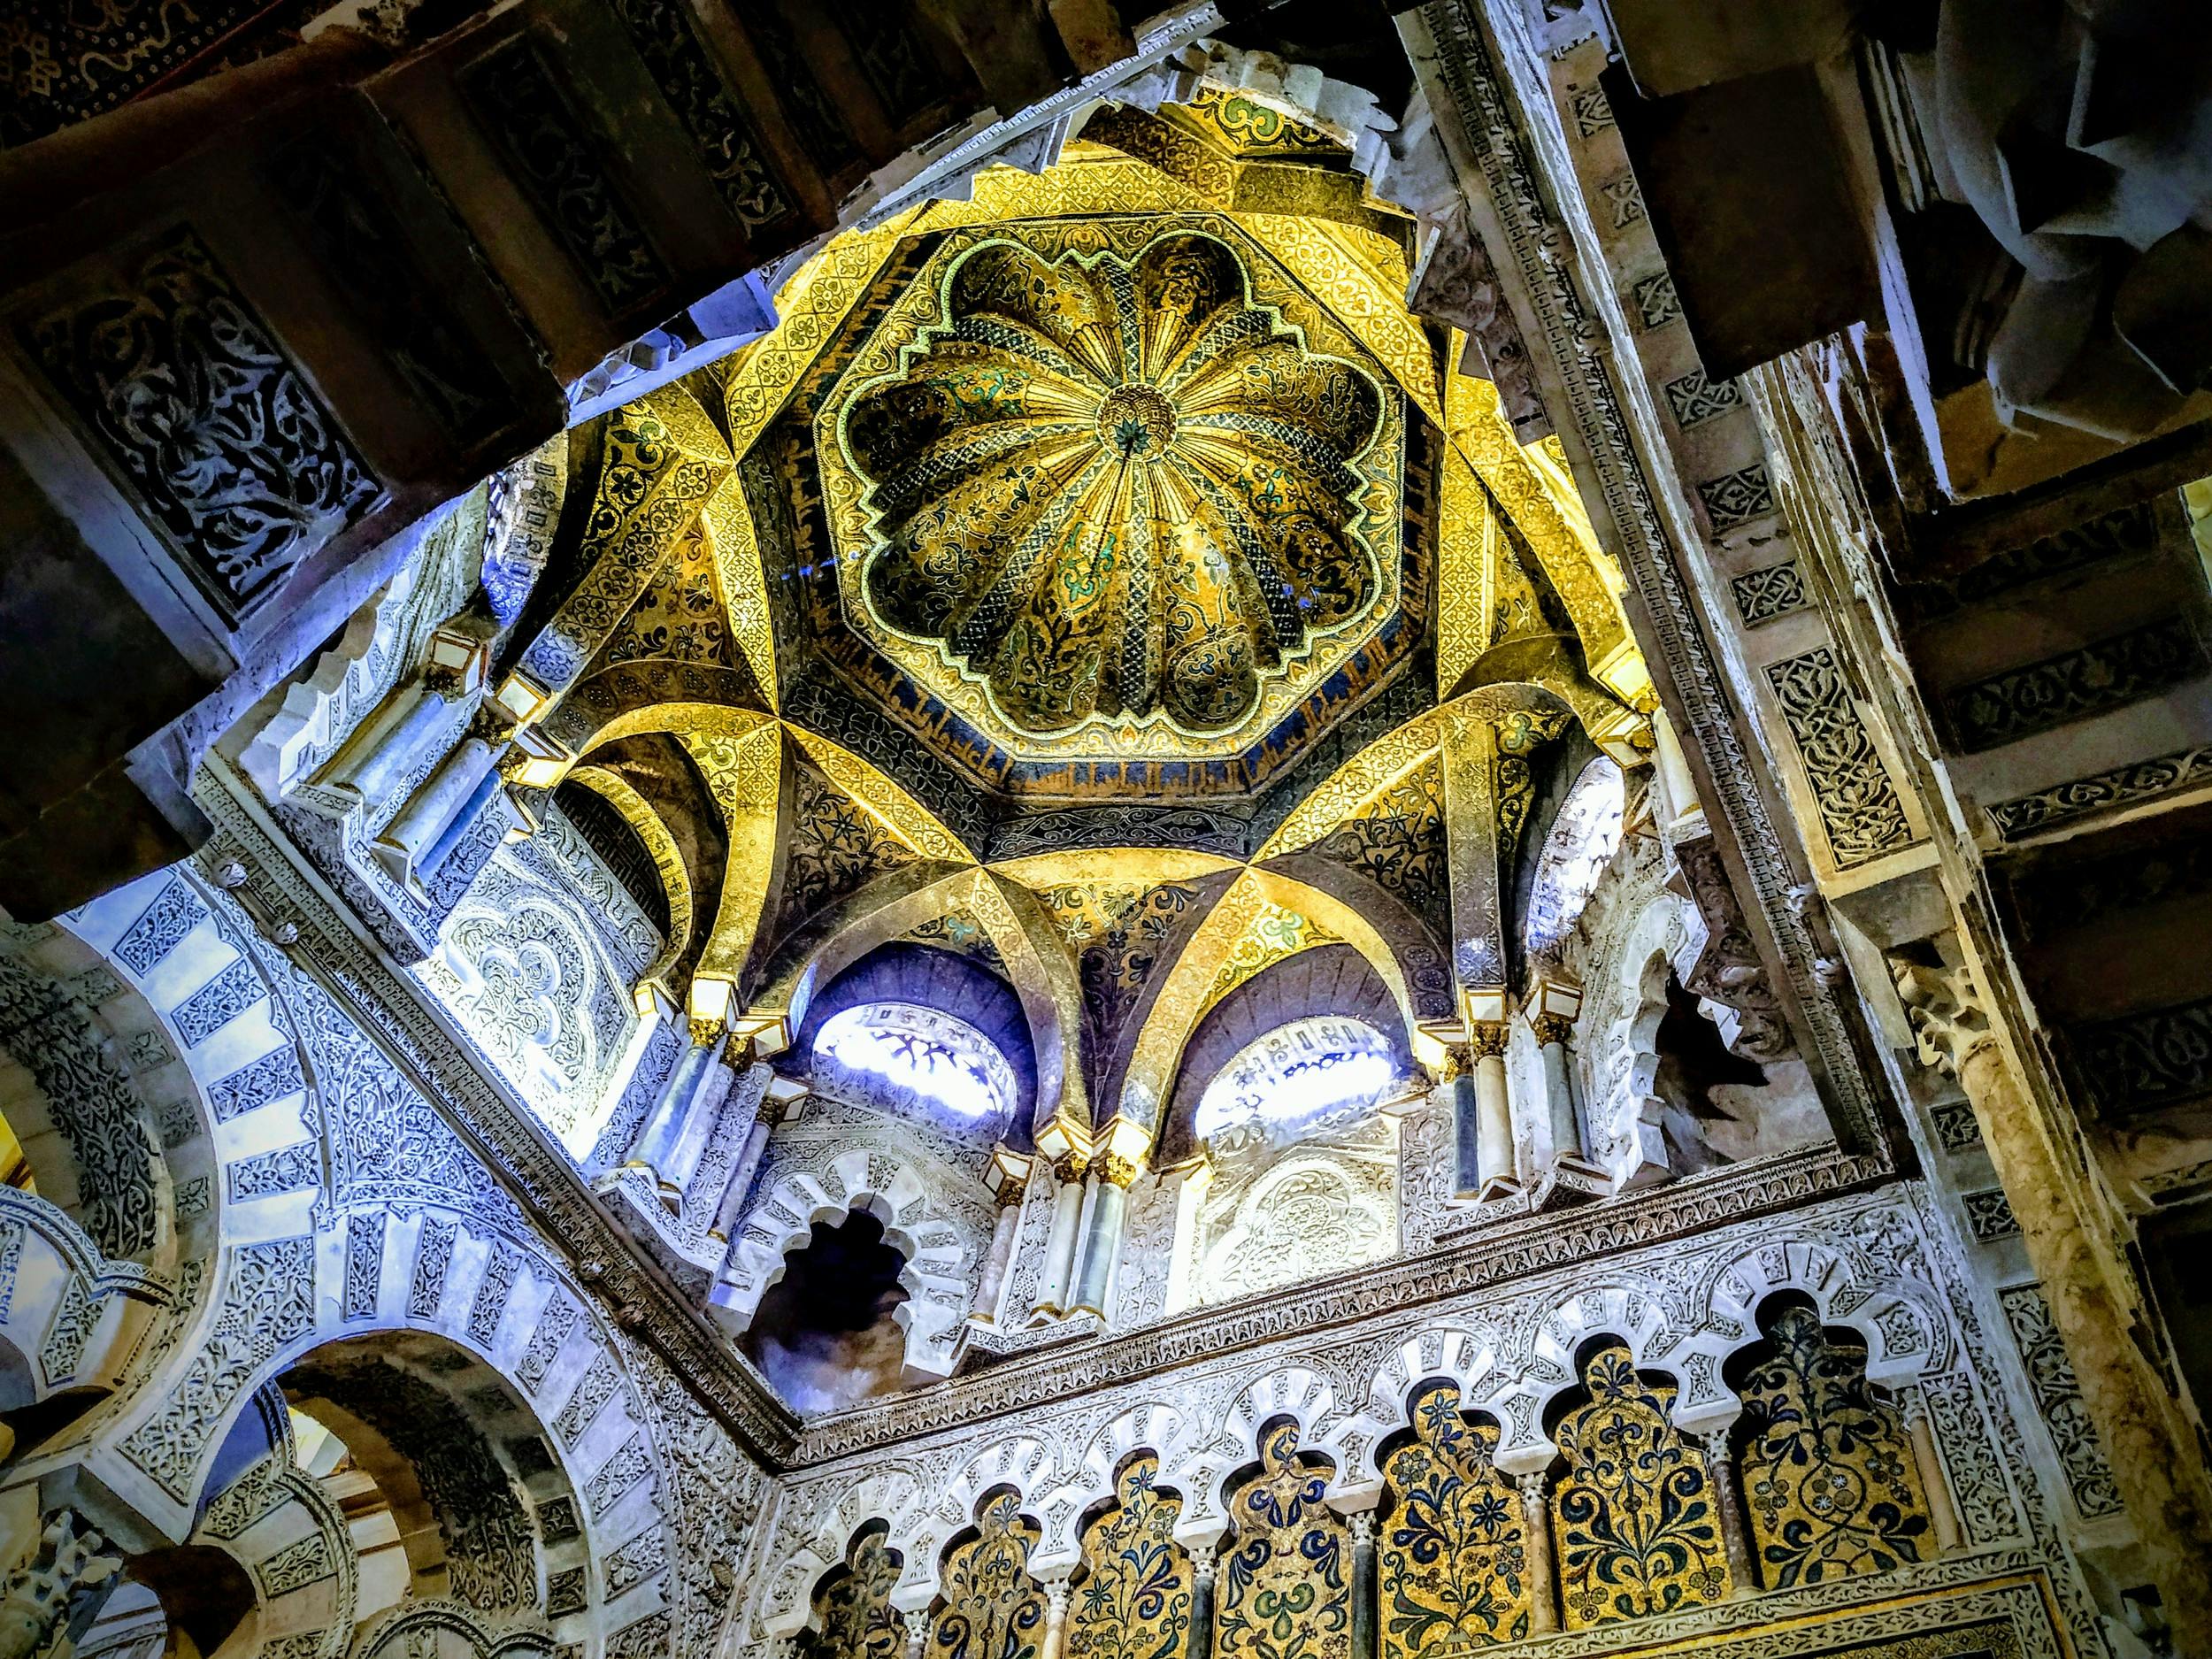 Guided tour of the Alcázar and the Mosque of Córdoba